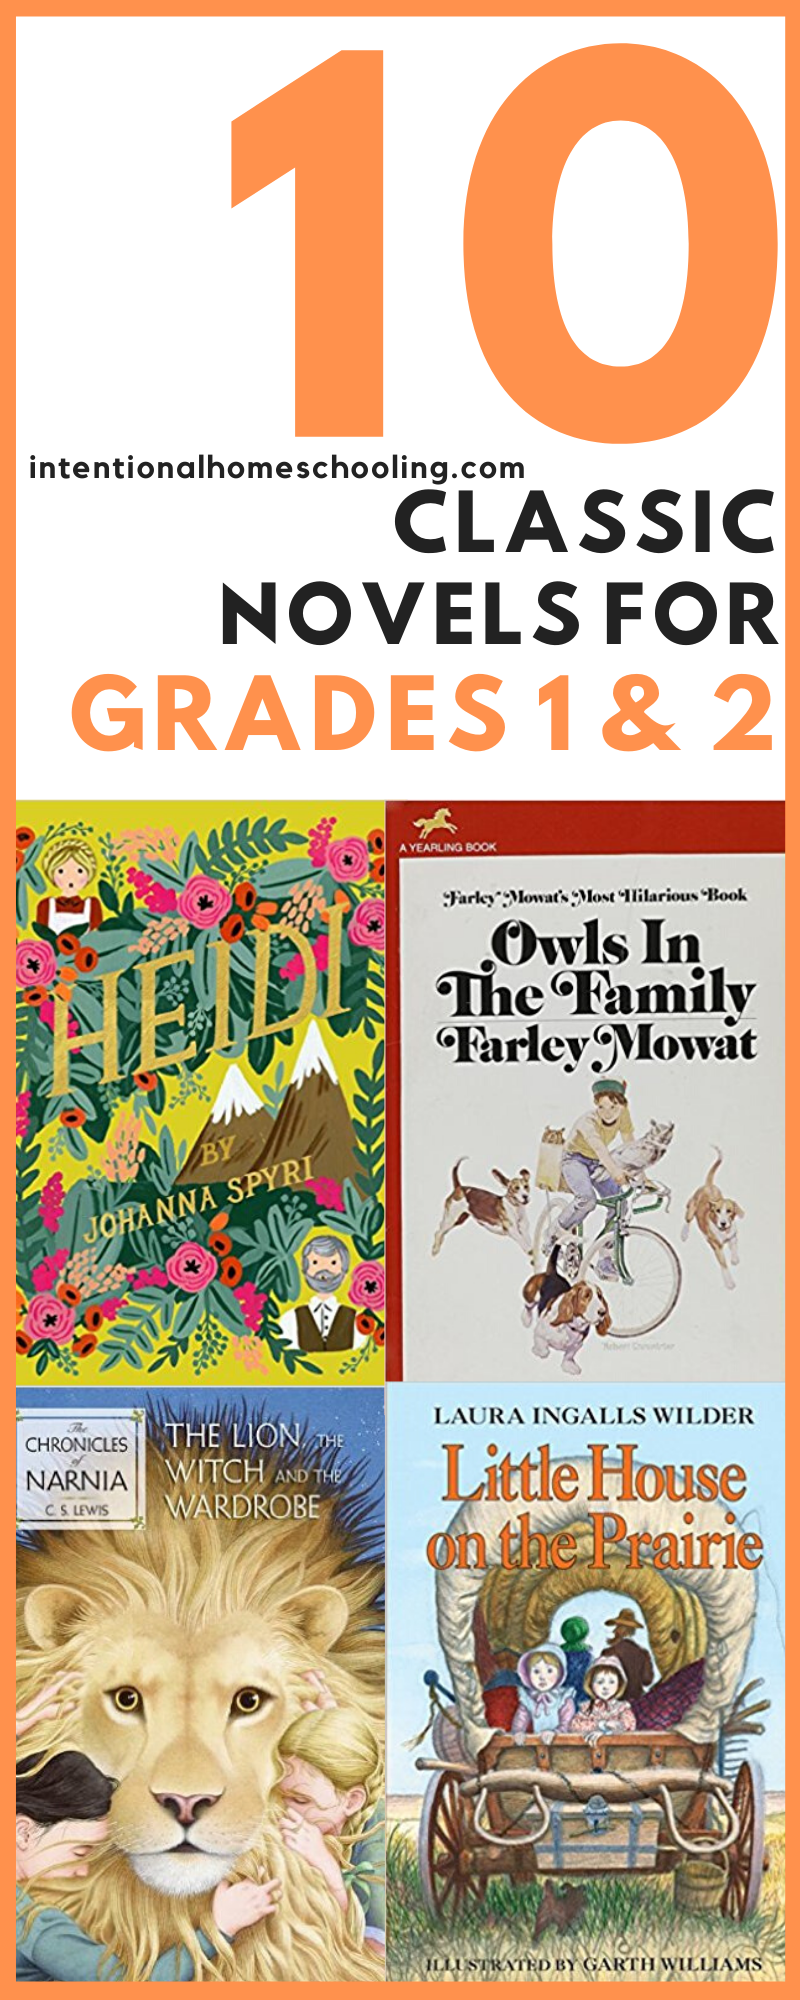 Classic books to read aloud with grade 1 and 2. They are truly classic novels the whole family will love.